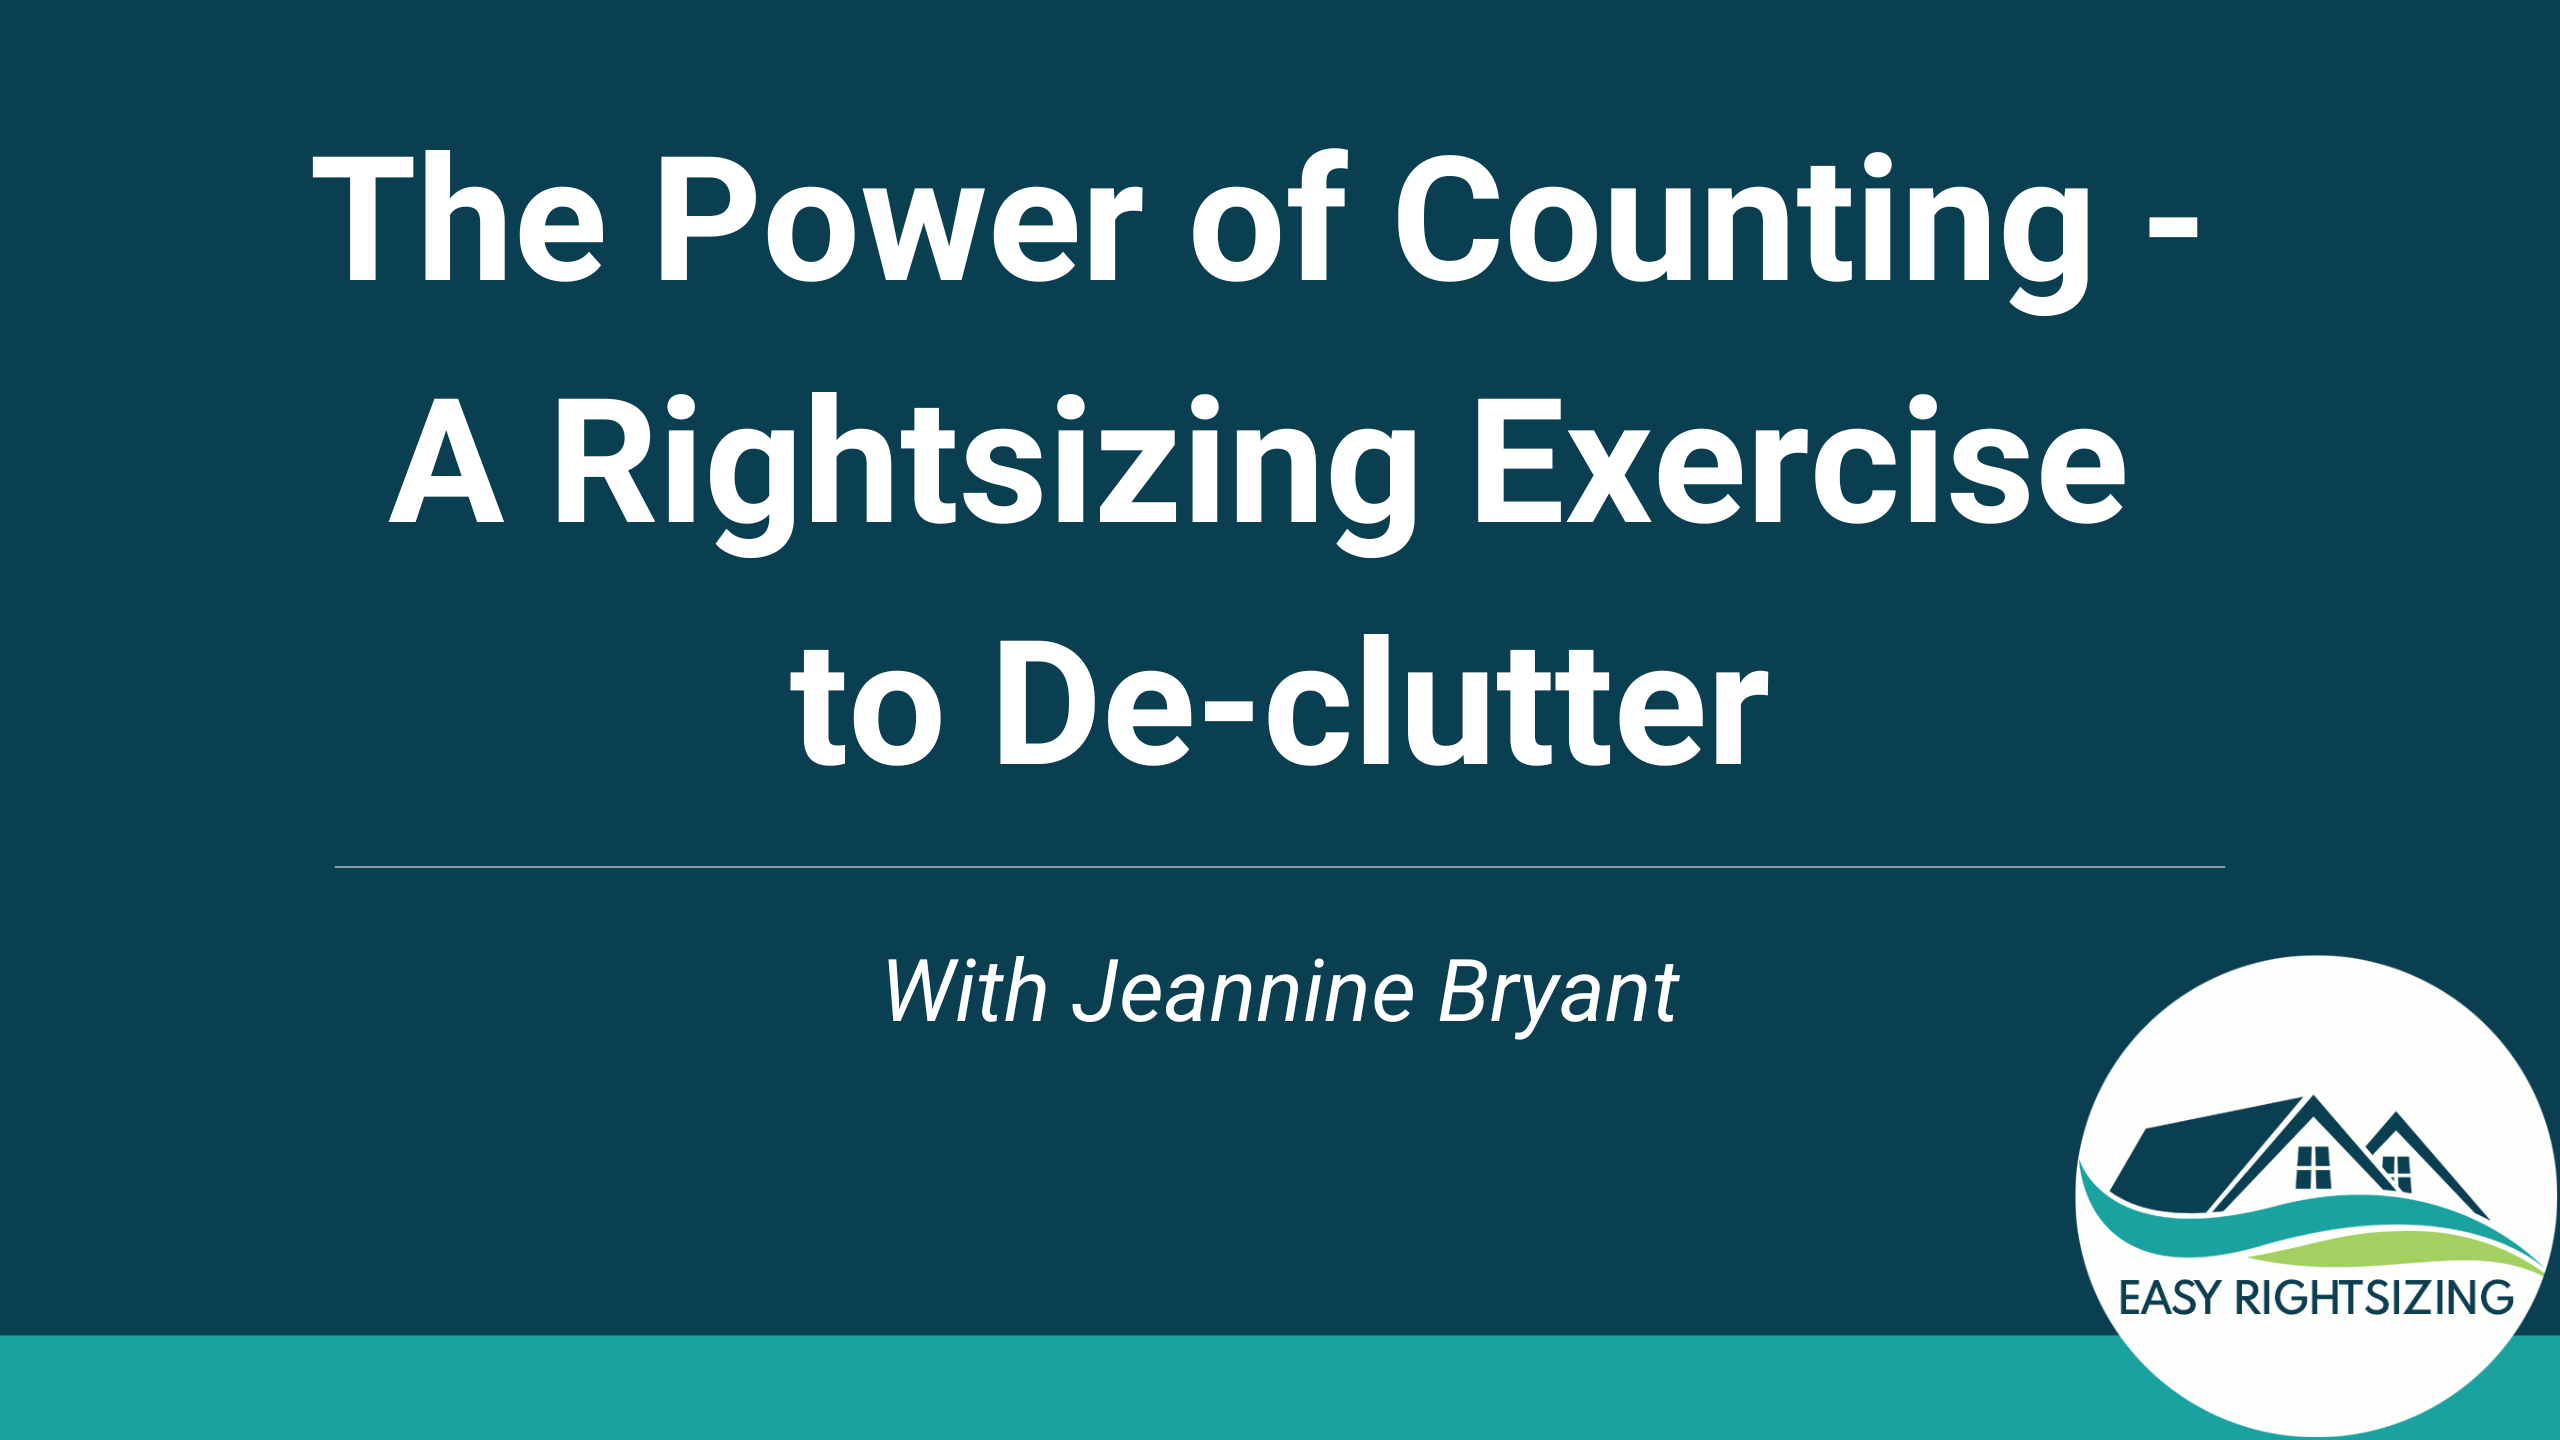 The Power of Counting - A Rightsizing Exercise to De-clutter